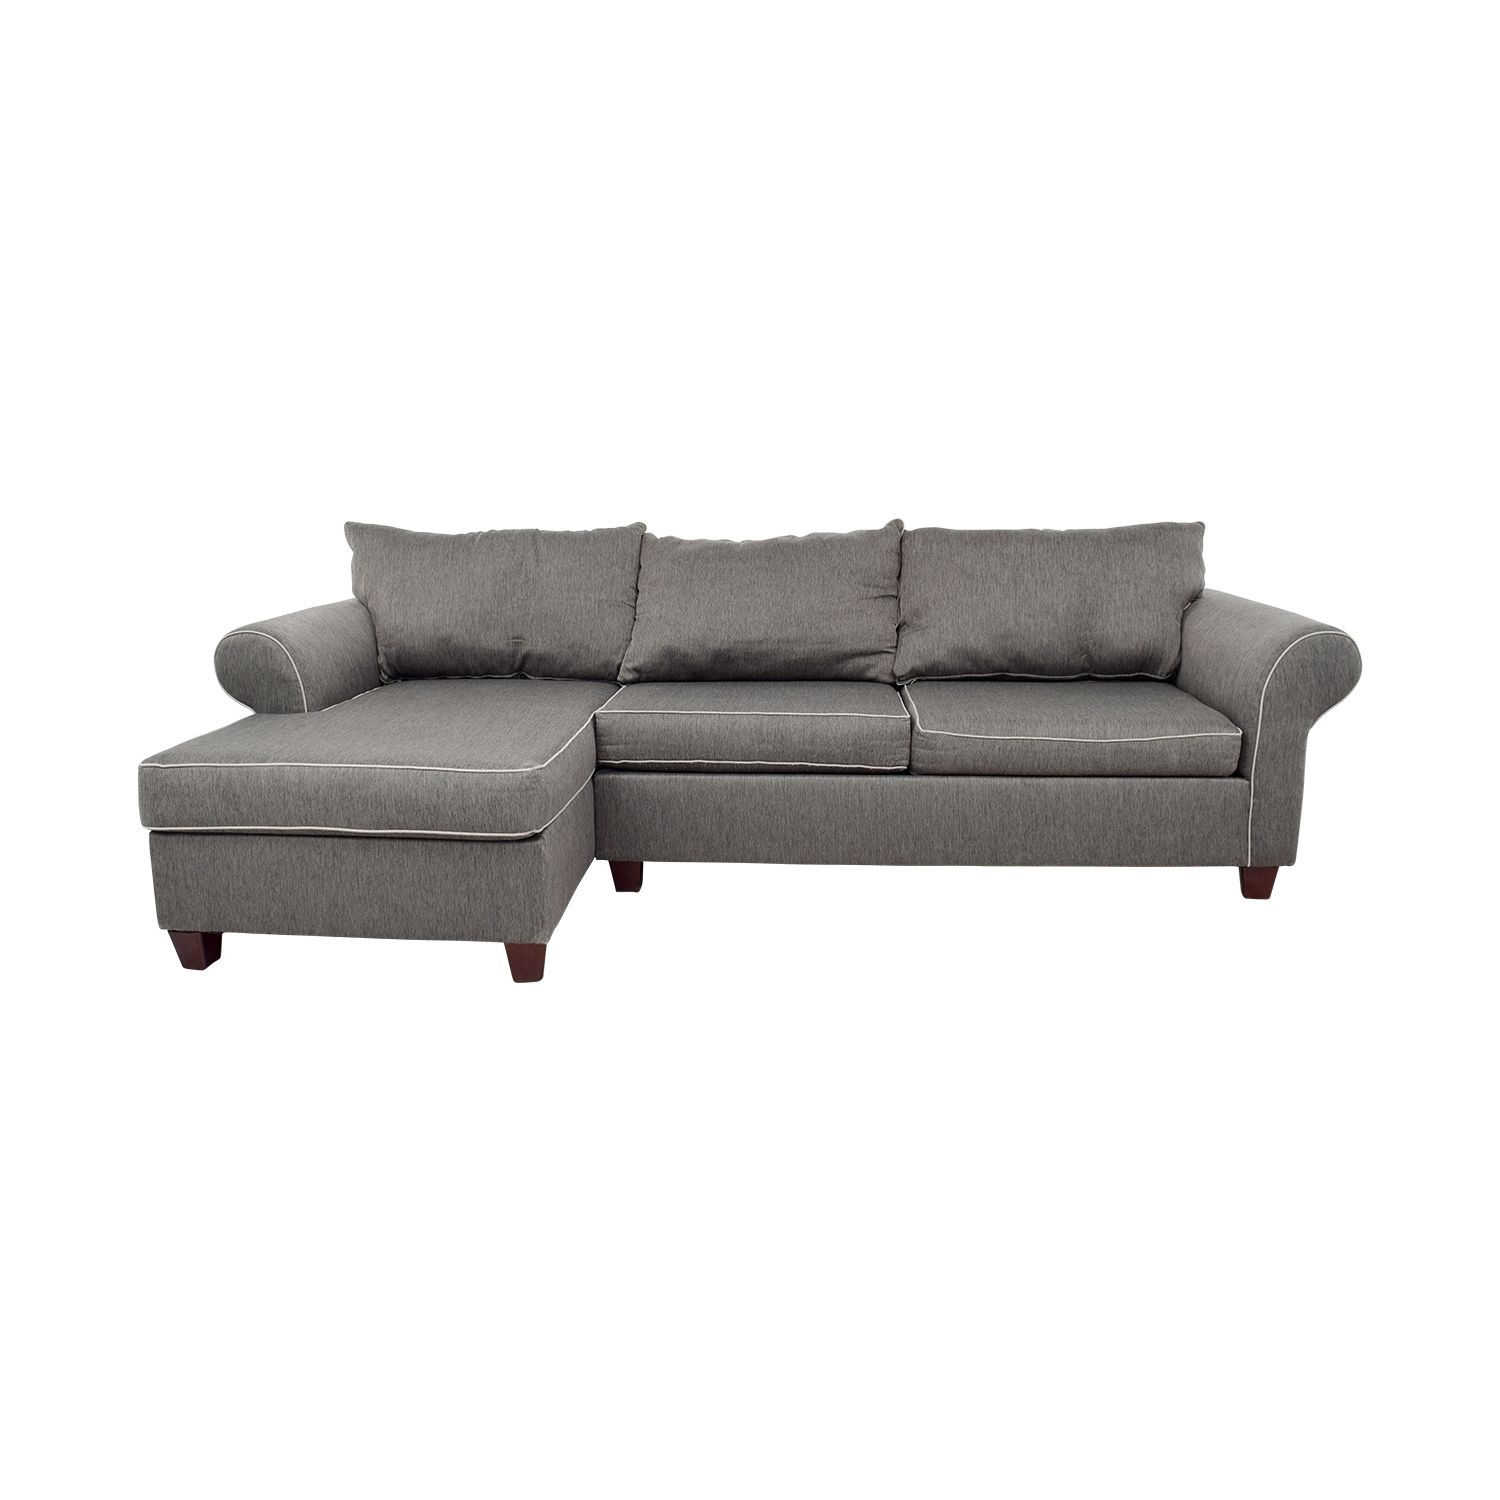 [%58% Off – Bob's Furniture Bob's Furniture Grey Chaise Sectional Throughout Recent Bobs Furniture Chaises|bobs Furniture Chaises Throughout Preferred 58% Off – Bob's Furniture Bob's Furniture Grey Chaise Sectional|most Current Bobs Furniture Chaises With Regard To 58% Off – Bob's Furniture Bob's Furniture Grey Chaise Sectional|well Known 58% Off – Bob's Furniture Bob's Furniture Grey Chaise Sectional Within Bobs Furniture Chaises%] (Photo 6 of 15)